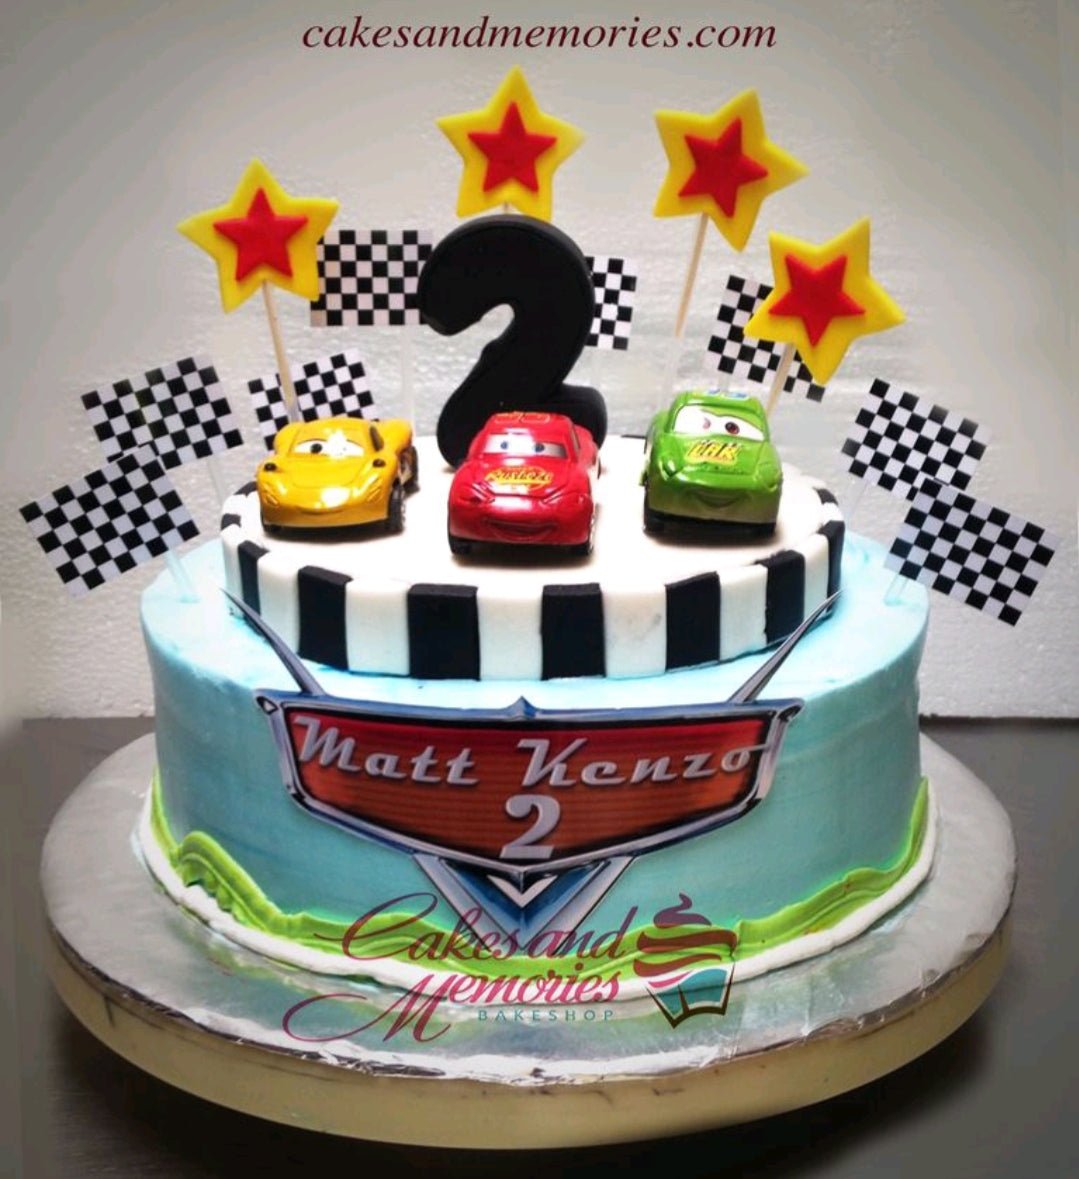 15 Amazing and Creative Cake Ideas For Boys